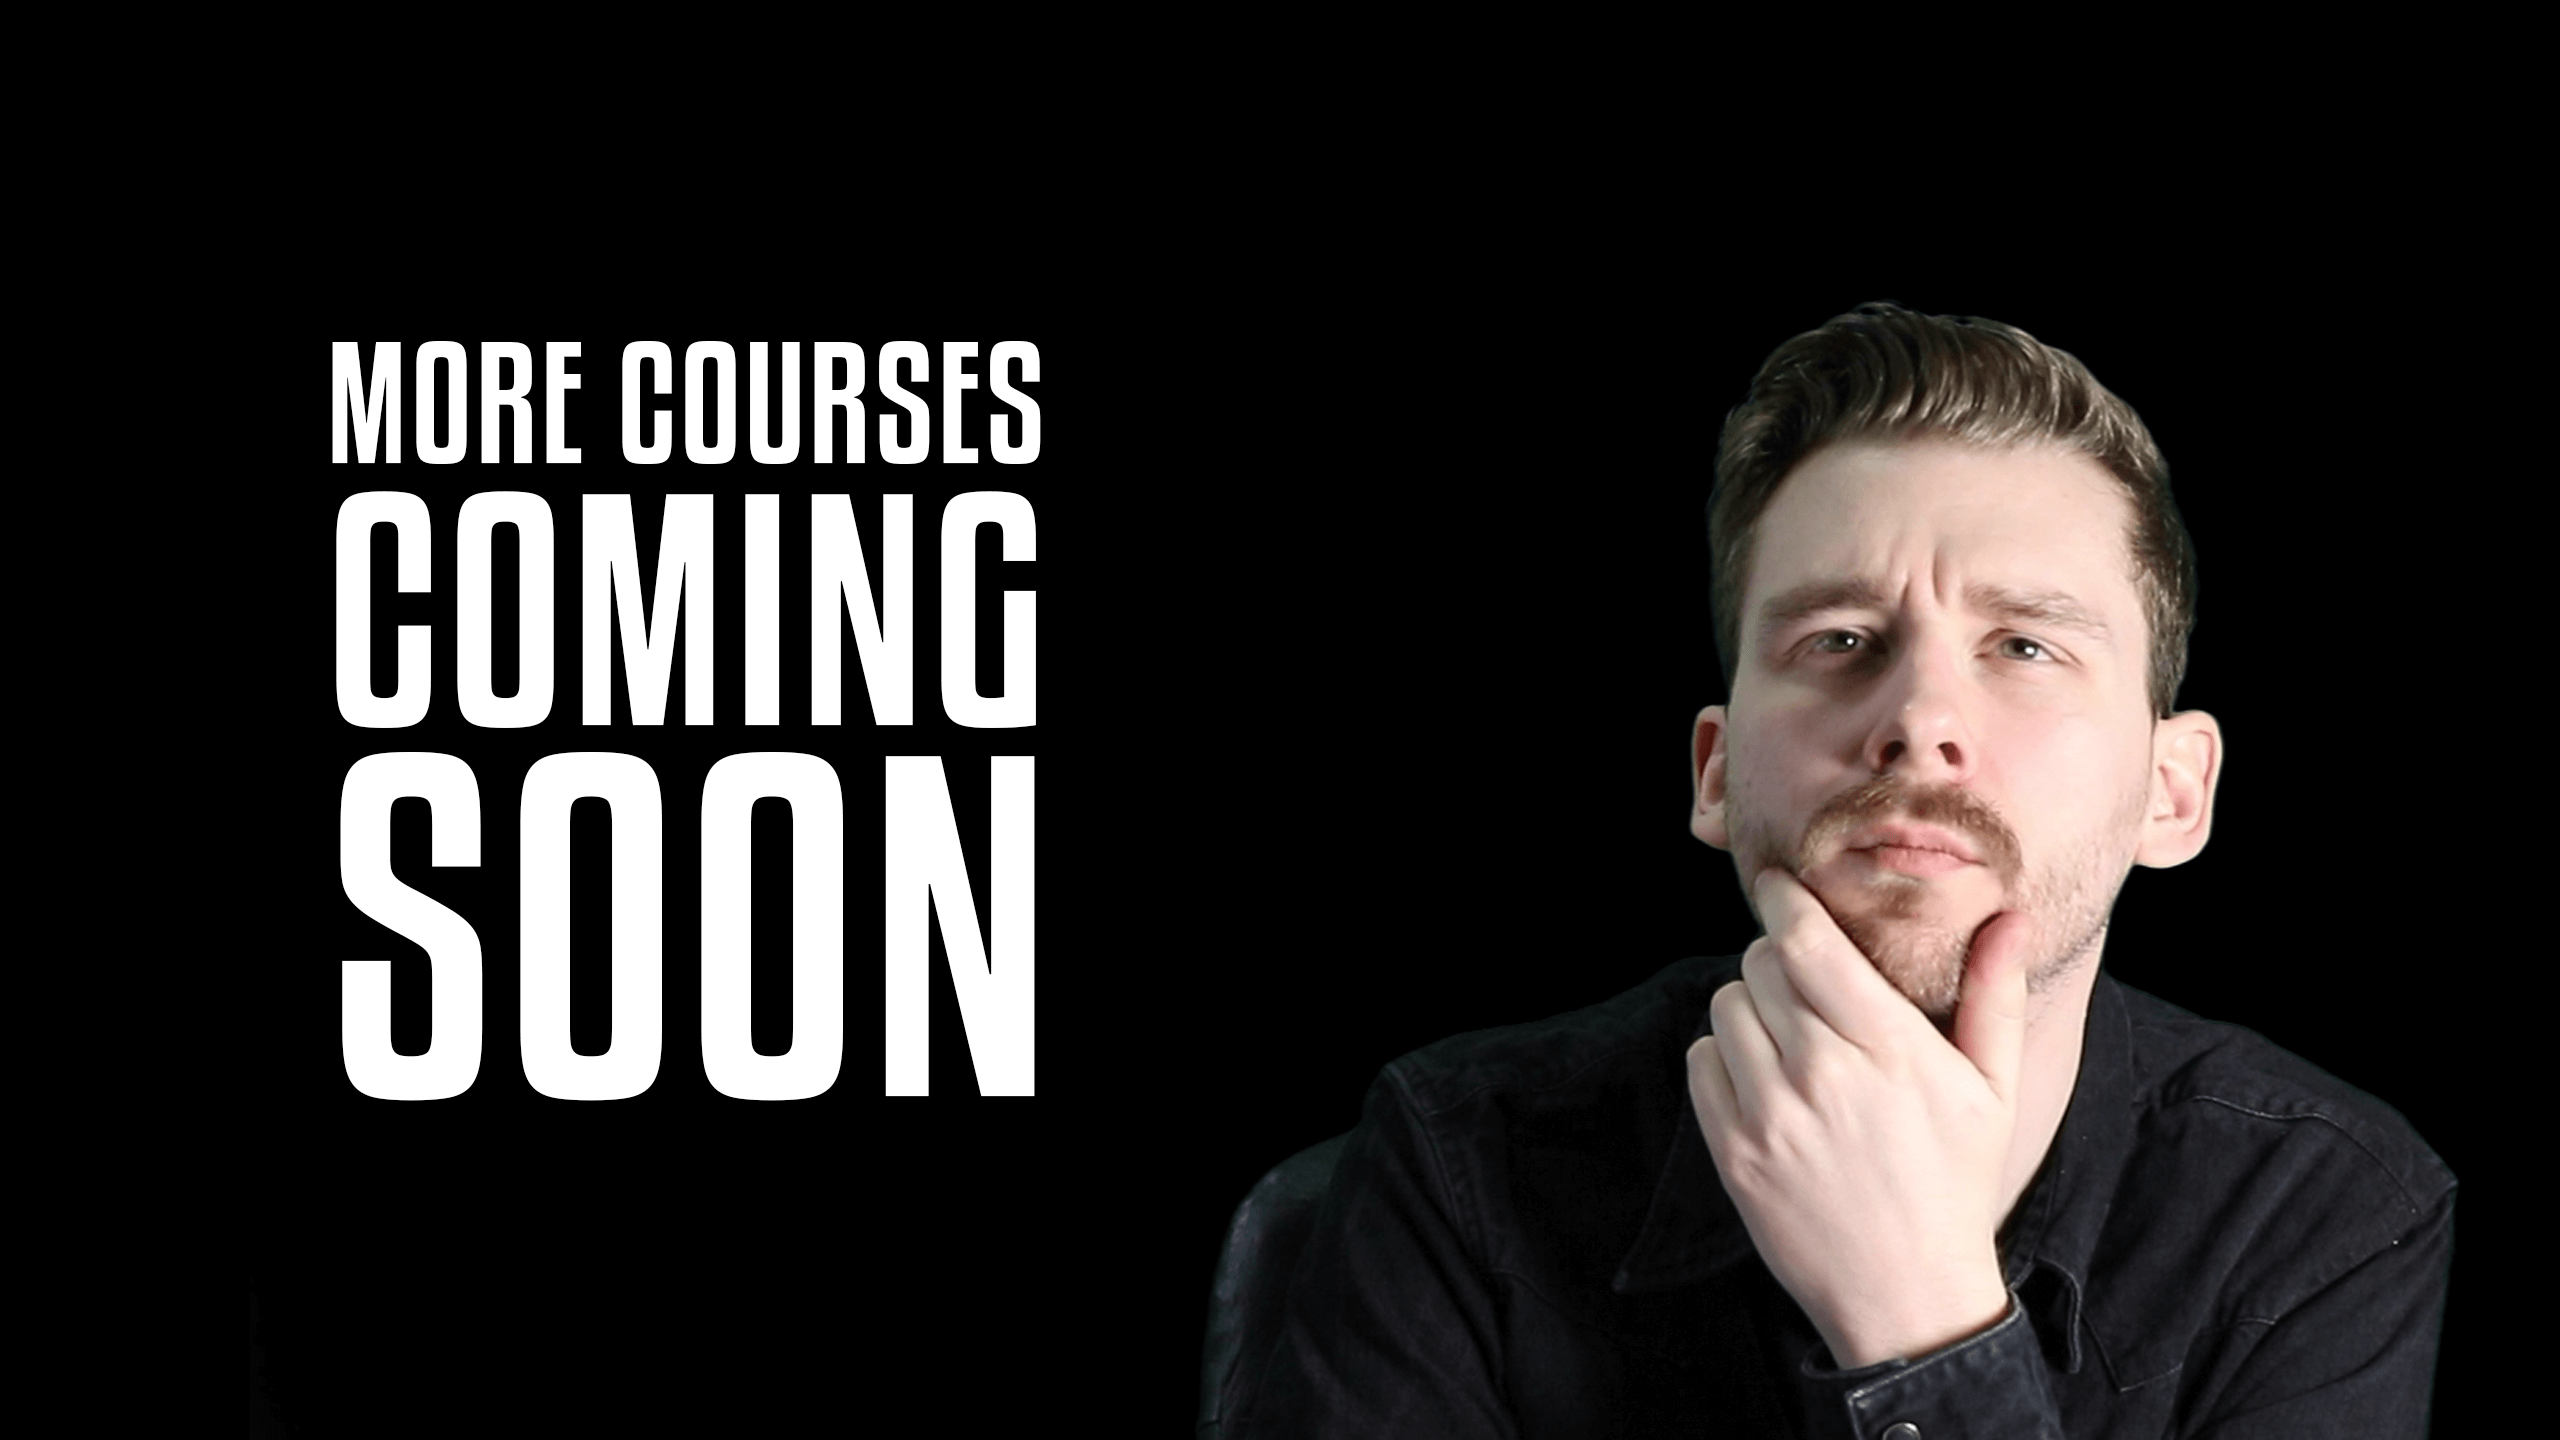 More courses coming soon!